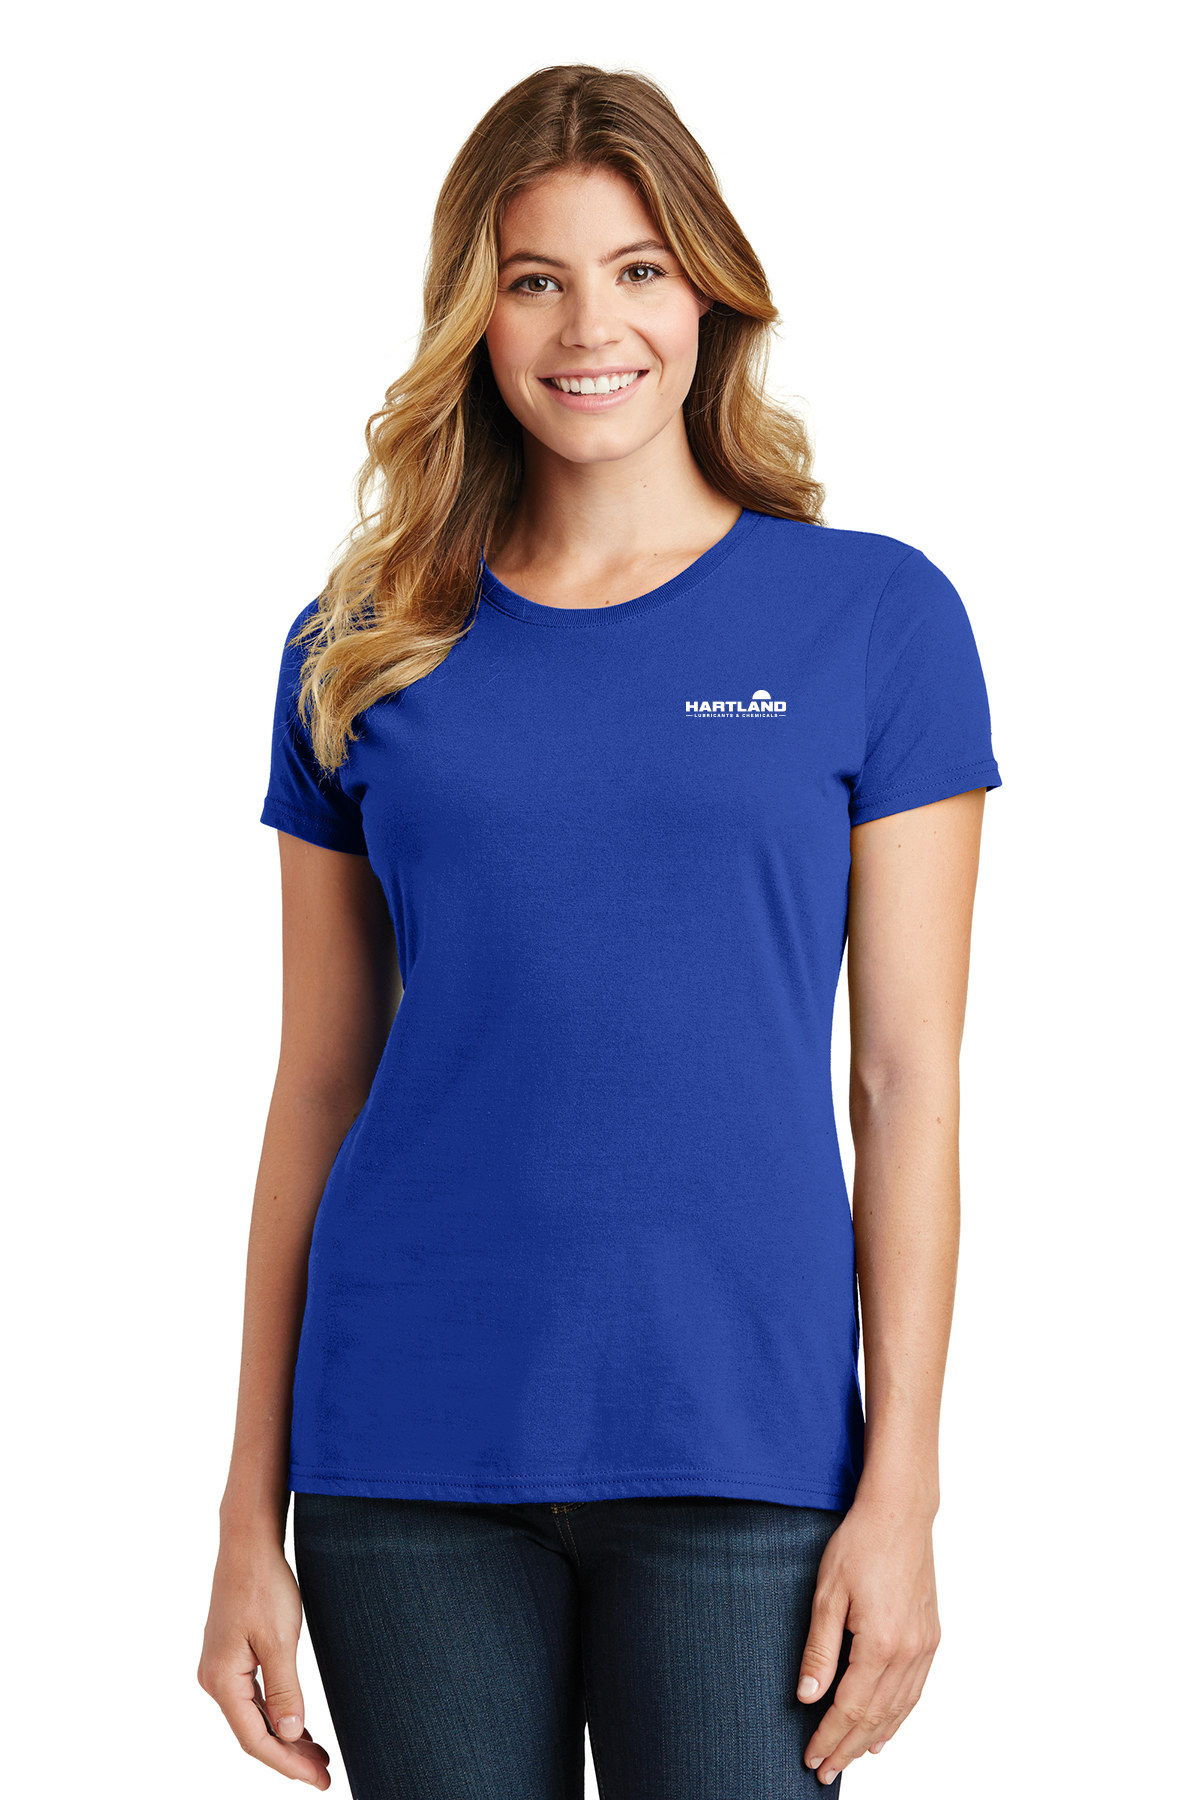 Hartland Lubricants and Chemicals Ladies T-Shirt